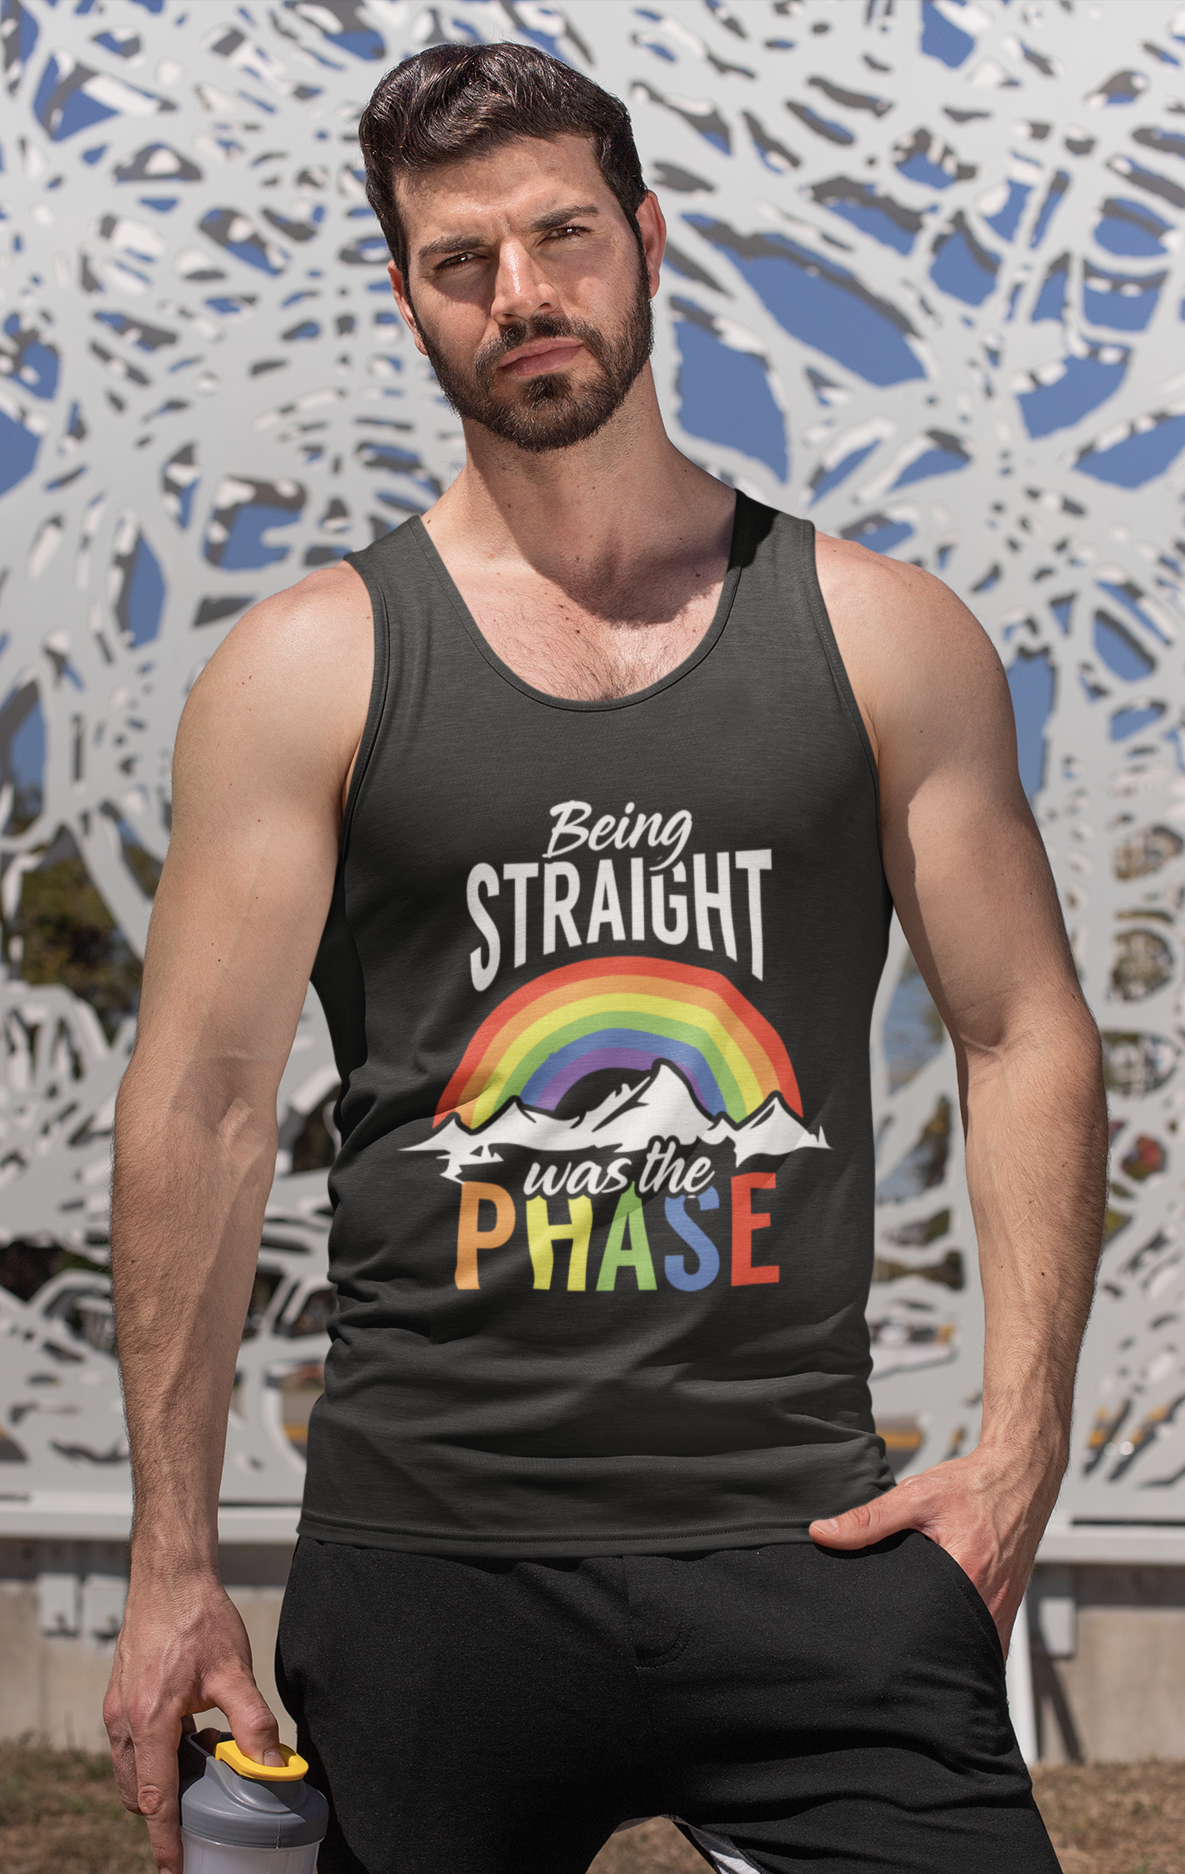 Being Straight was phase; Soft 100% cotton tank top. Removable tag for comfort